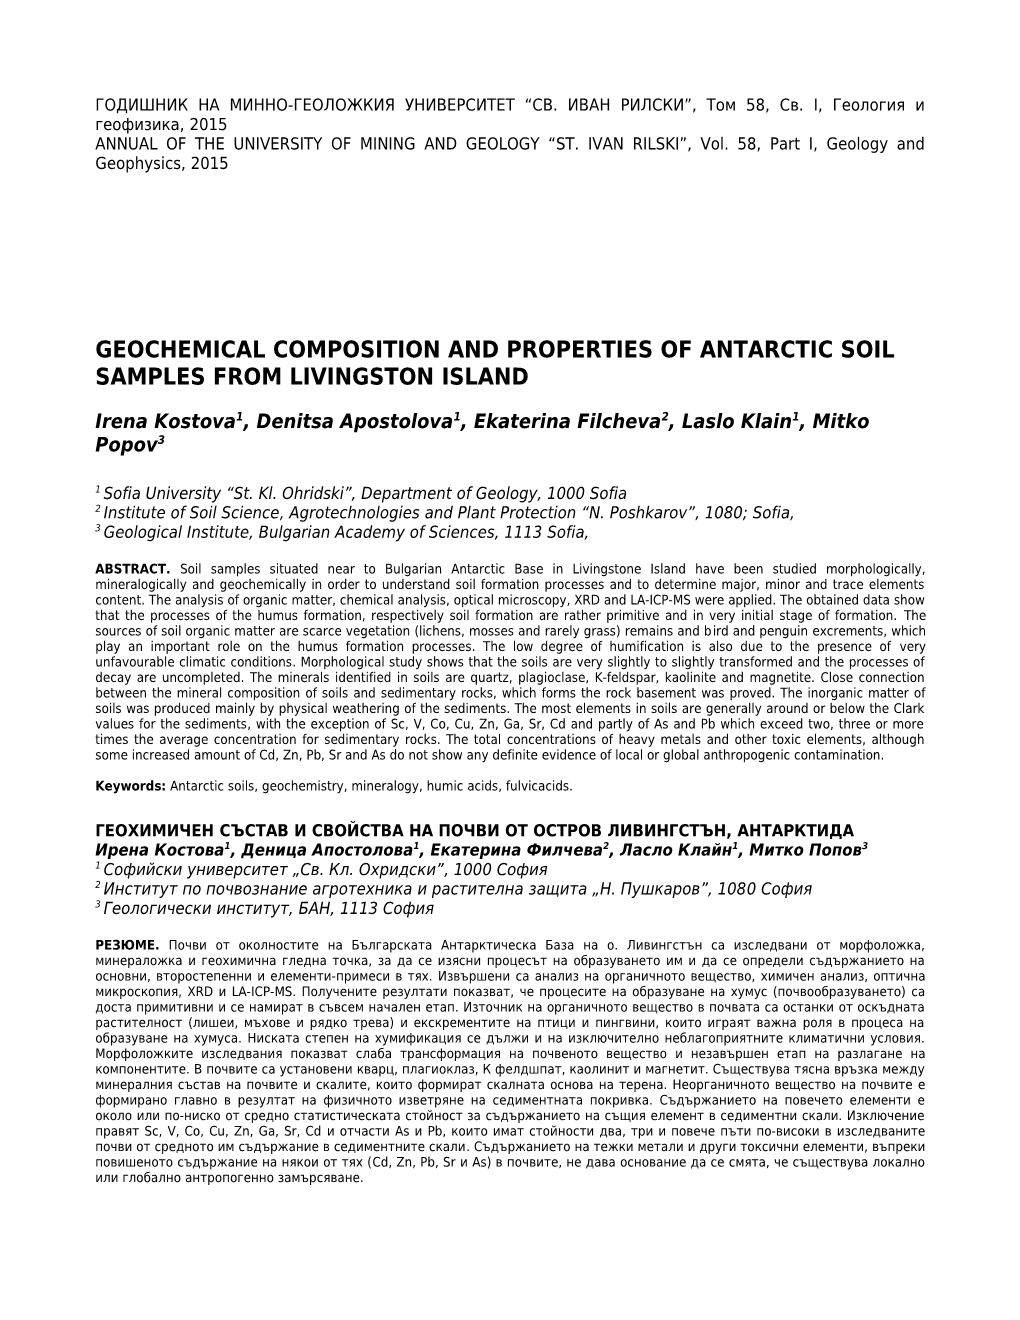 Geochemical Composition and Properties of Antarctic Soil Samples from Livingston Island